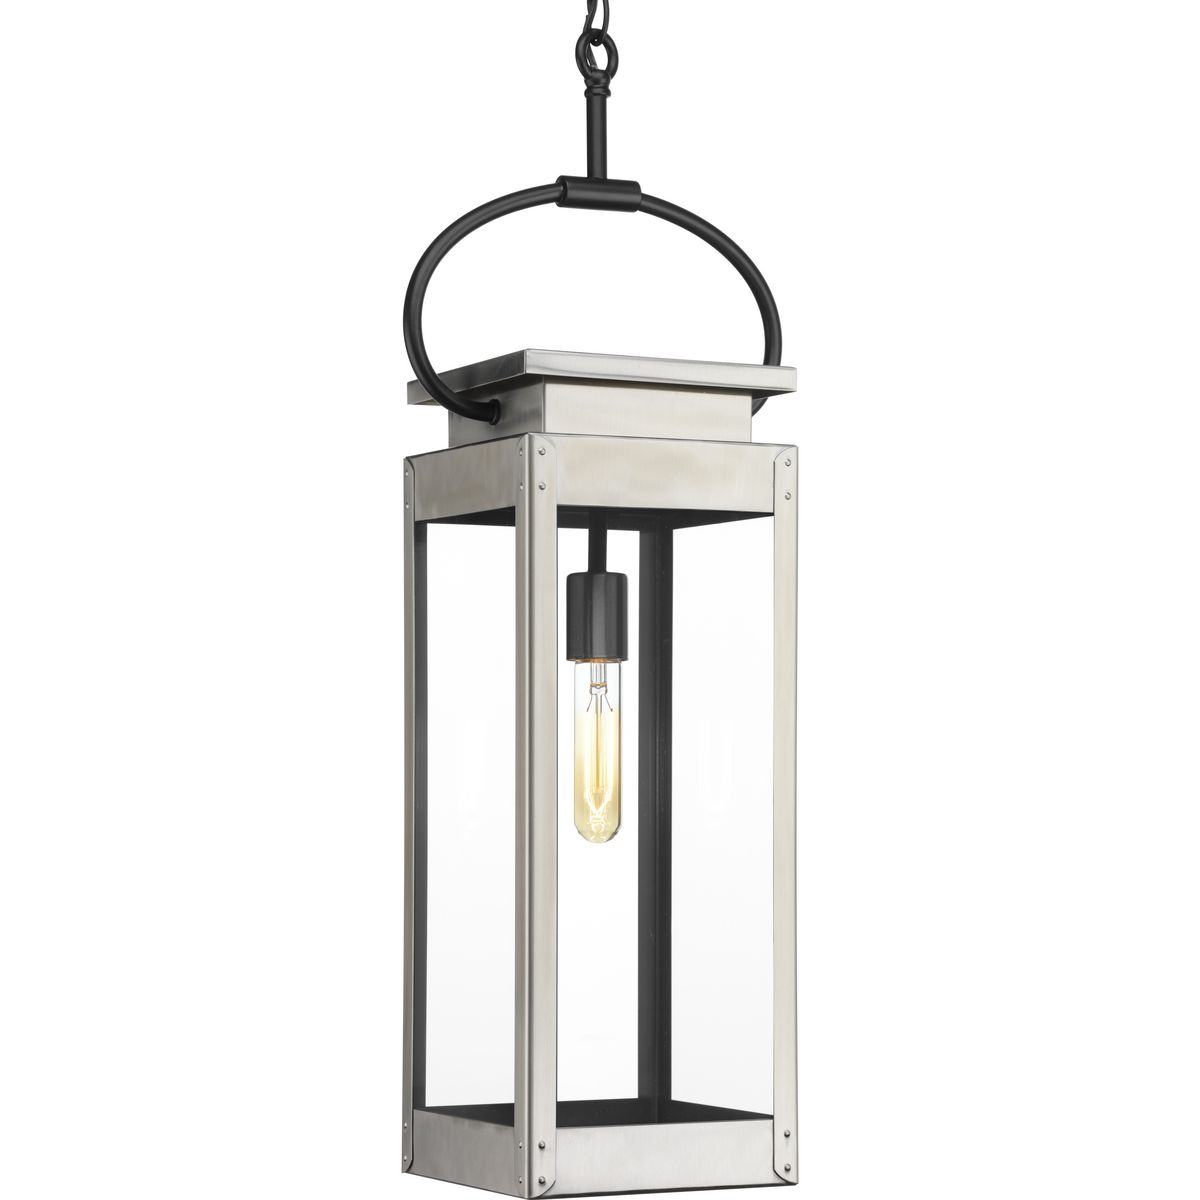 Union Square Collection One-light hanging lantern - Damp Location Listed